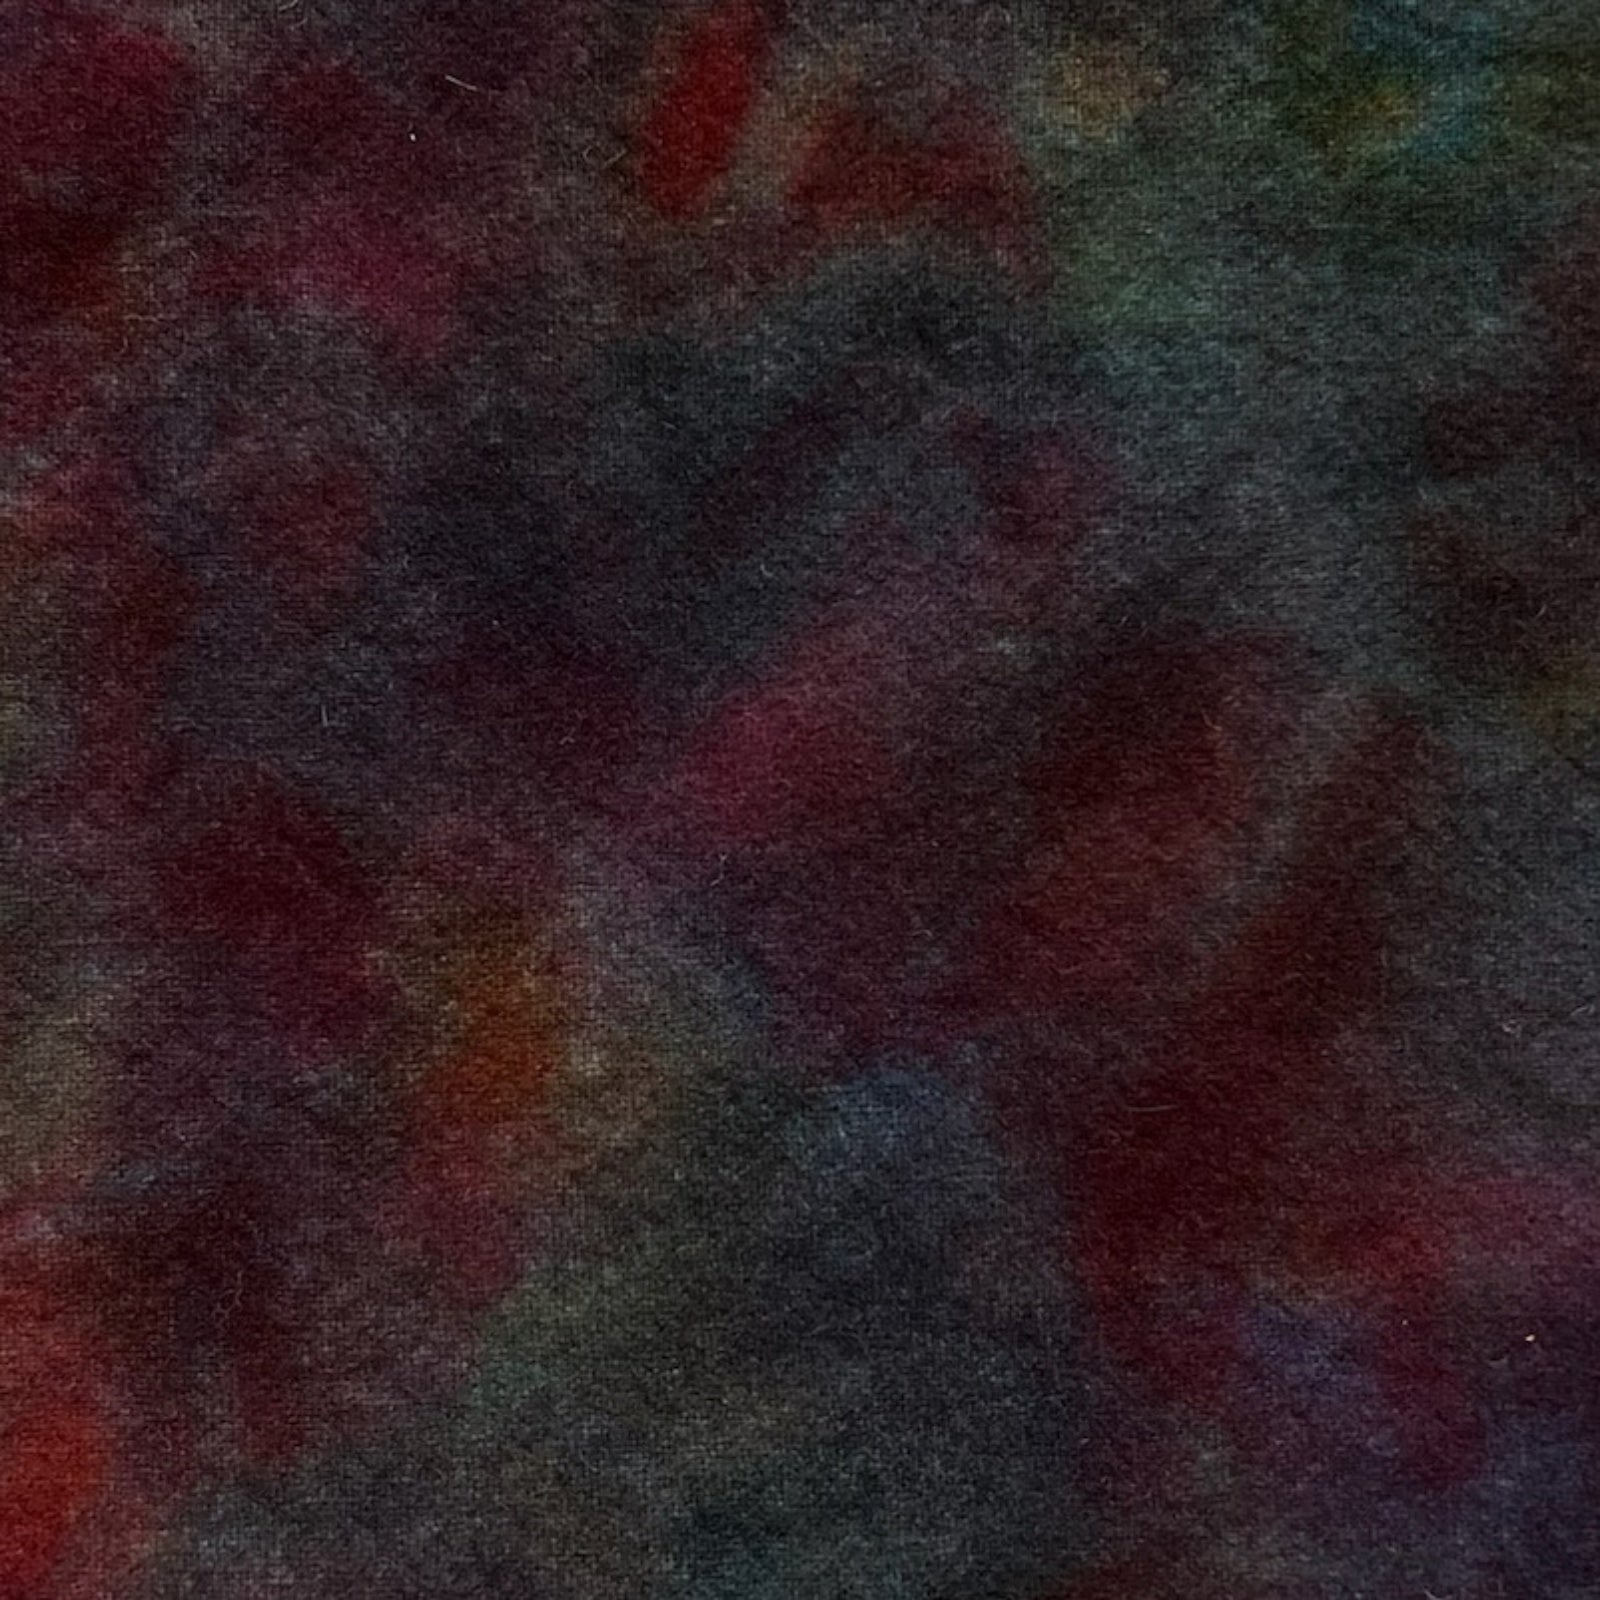 Lead - Colorama Hand Dyed Wool - Offered by HoneyBee Hive Rug Hooking